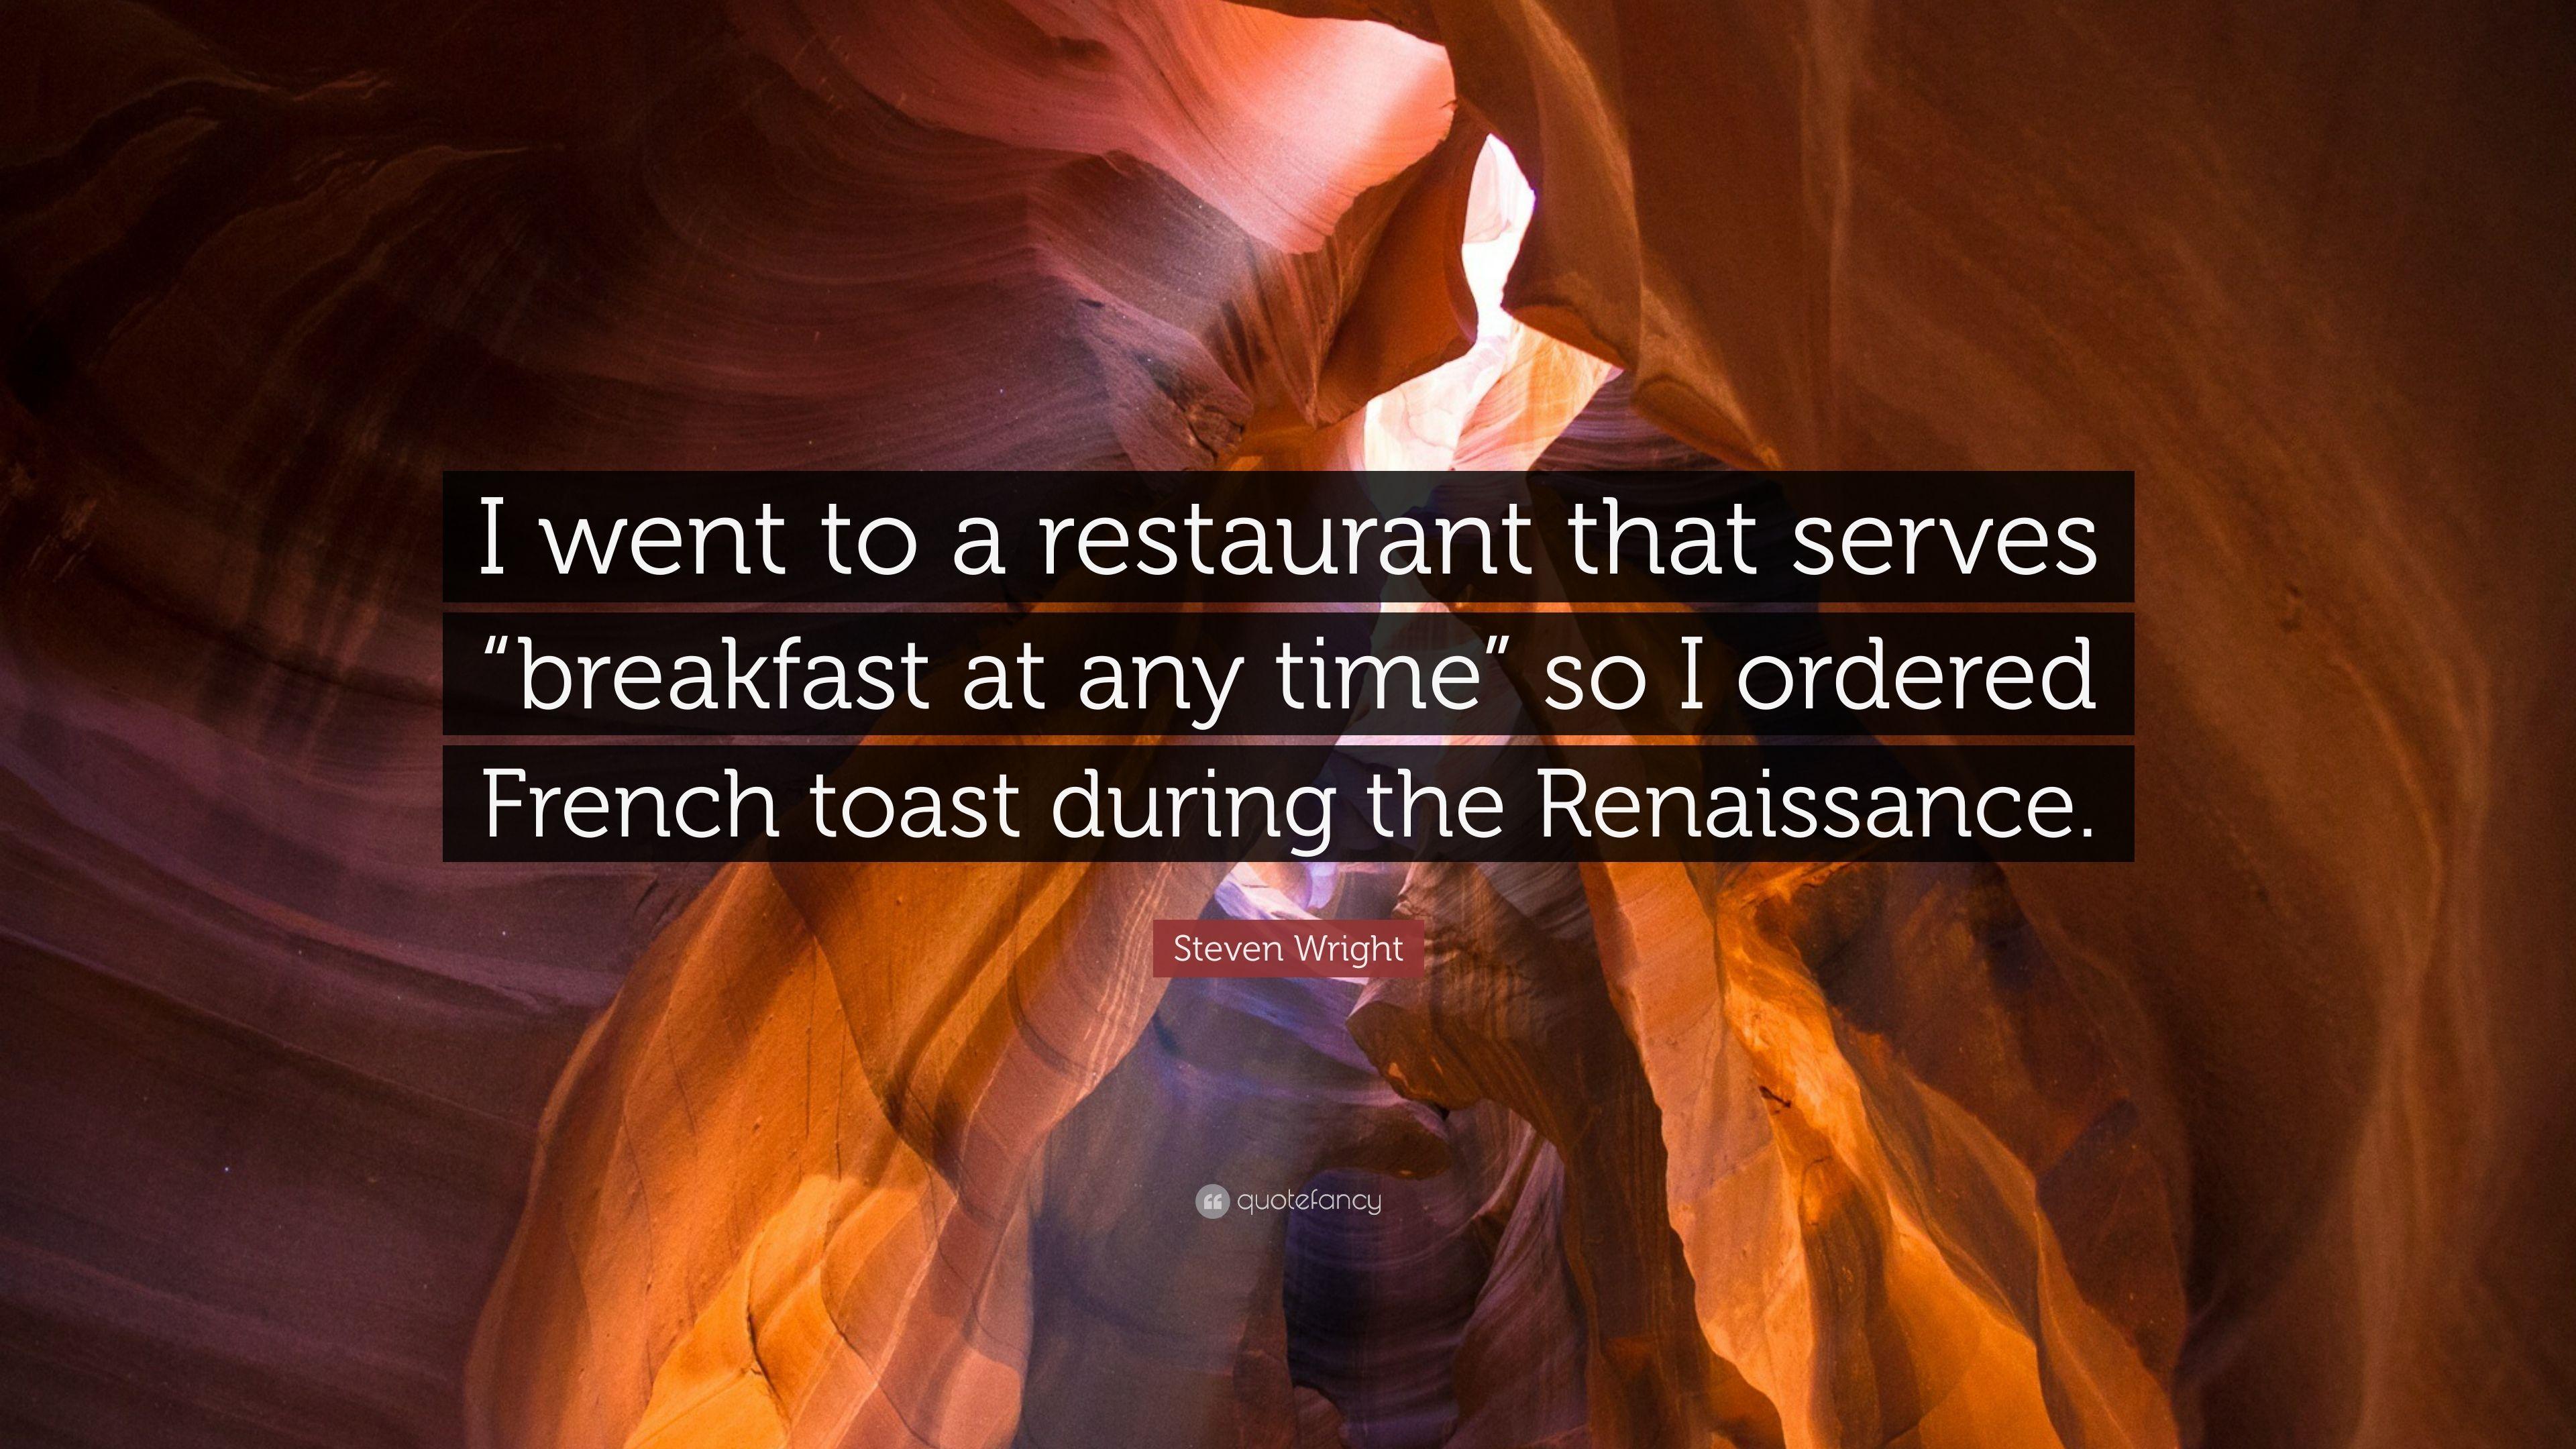 Steven Wright Quote: “I went to a restaurant that serves “breakfast